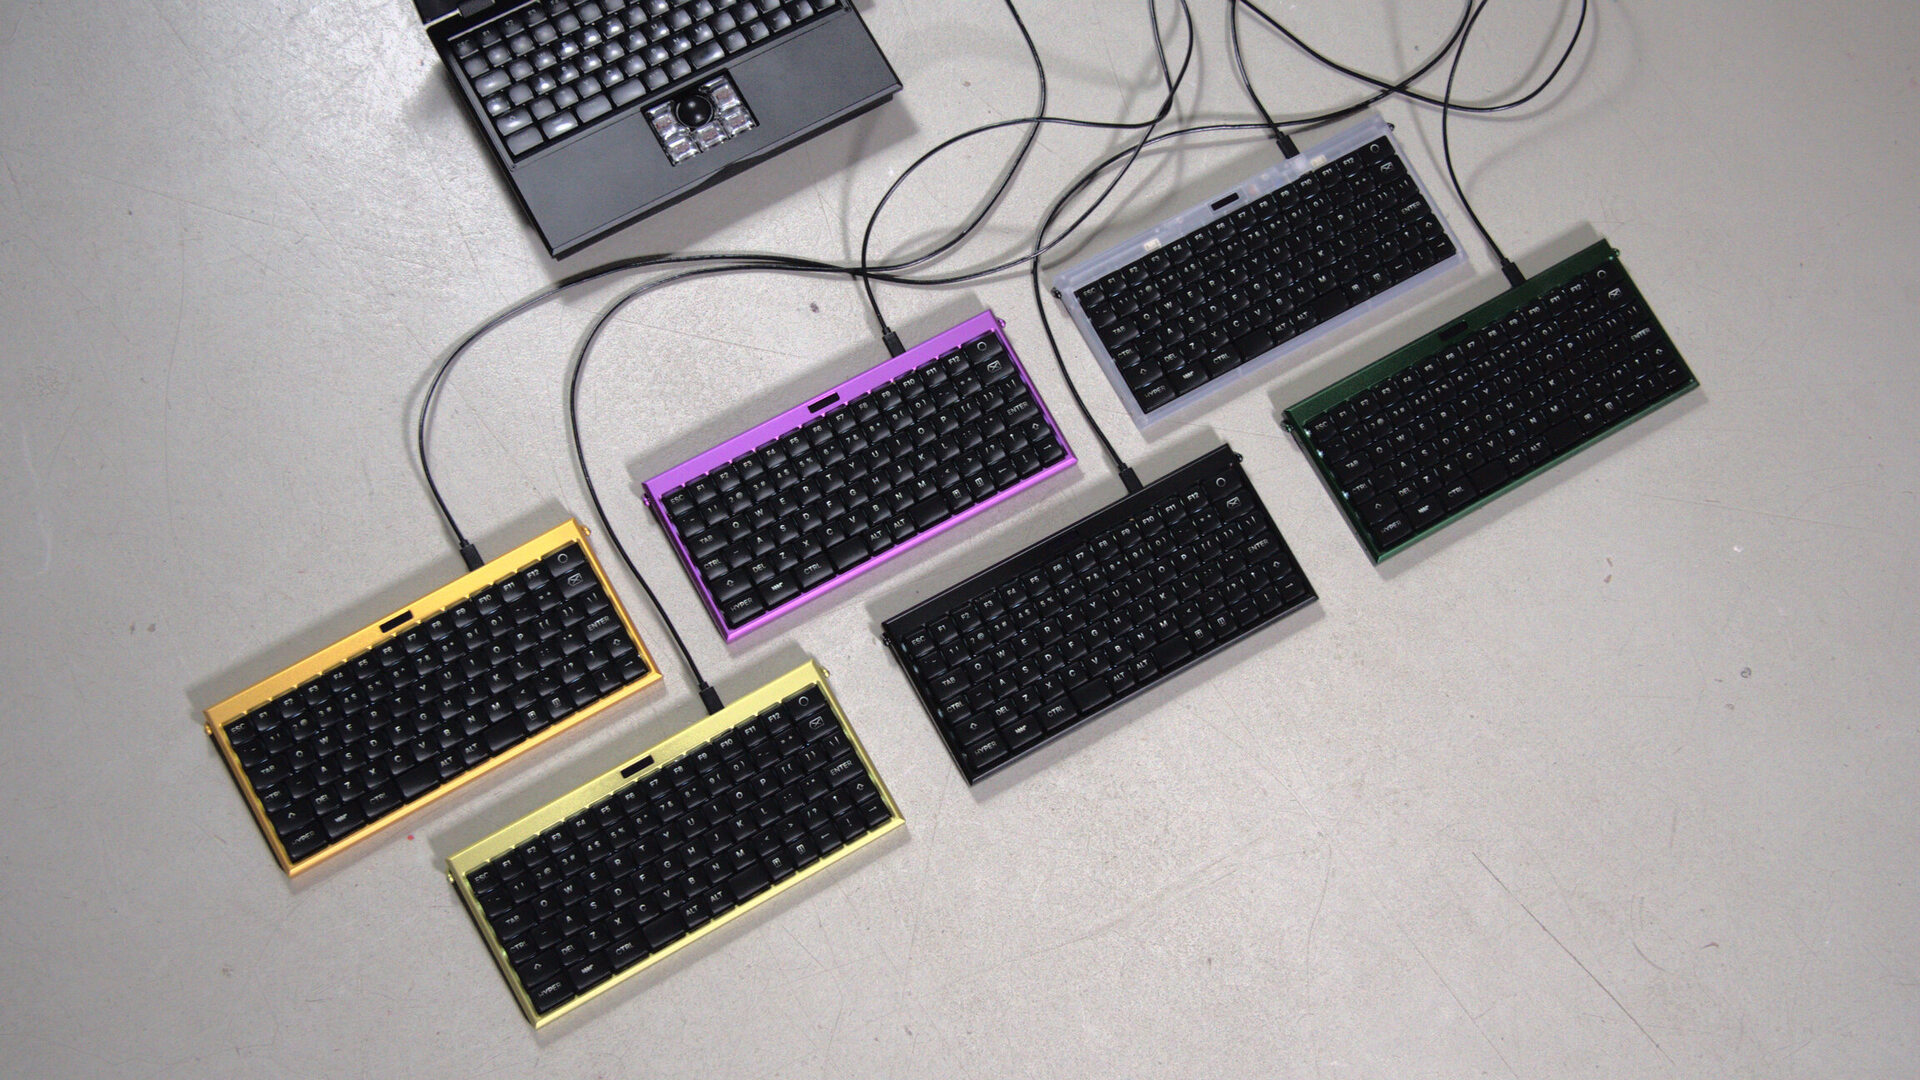 Overview of MNT Reform Keyboard family